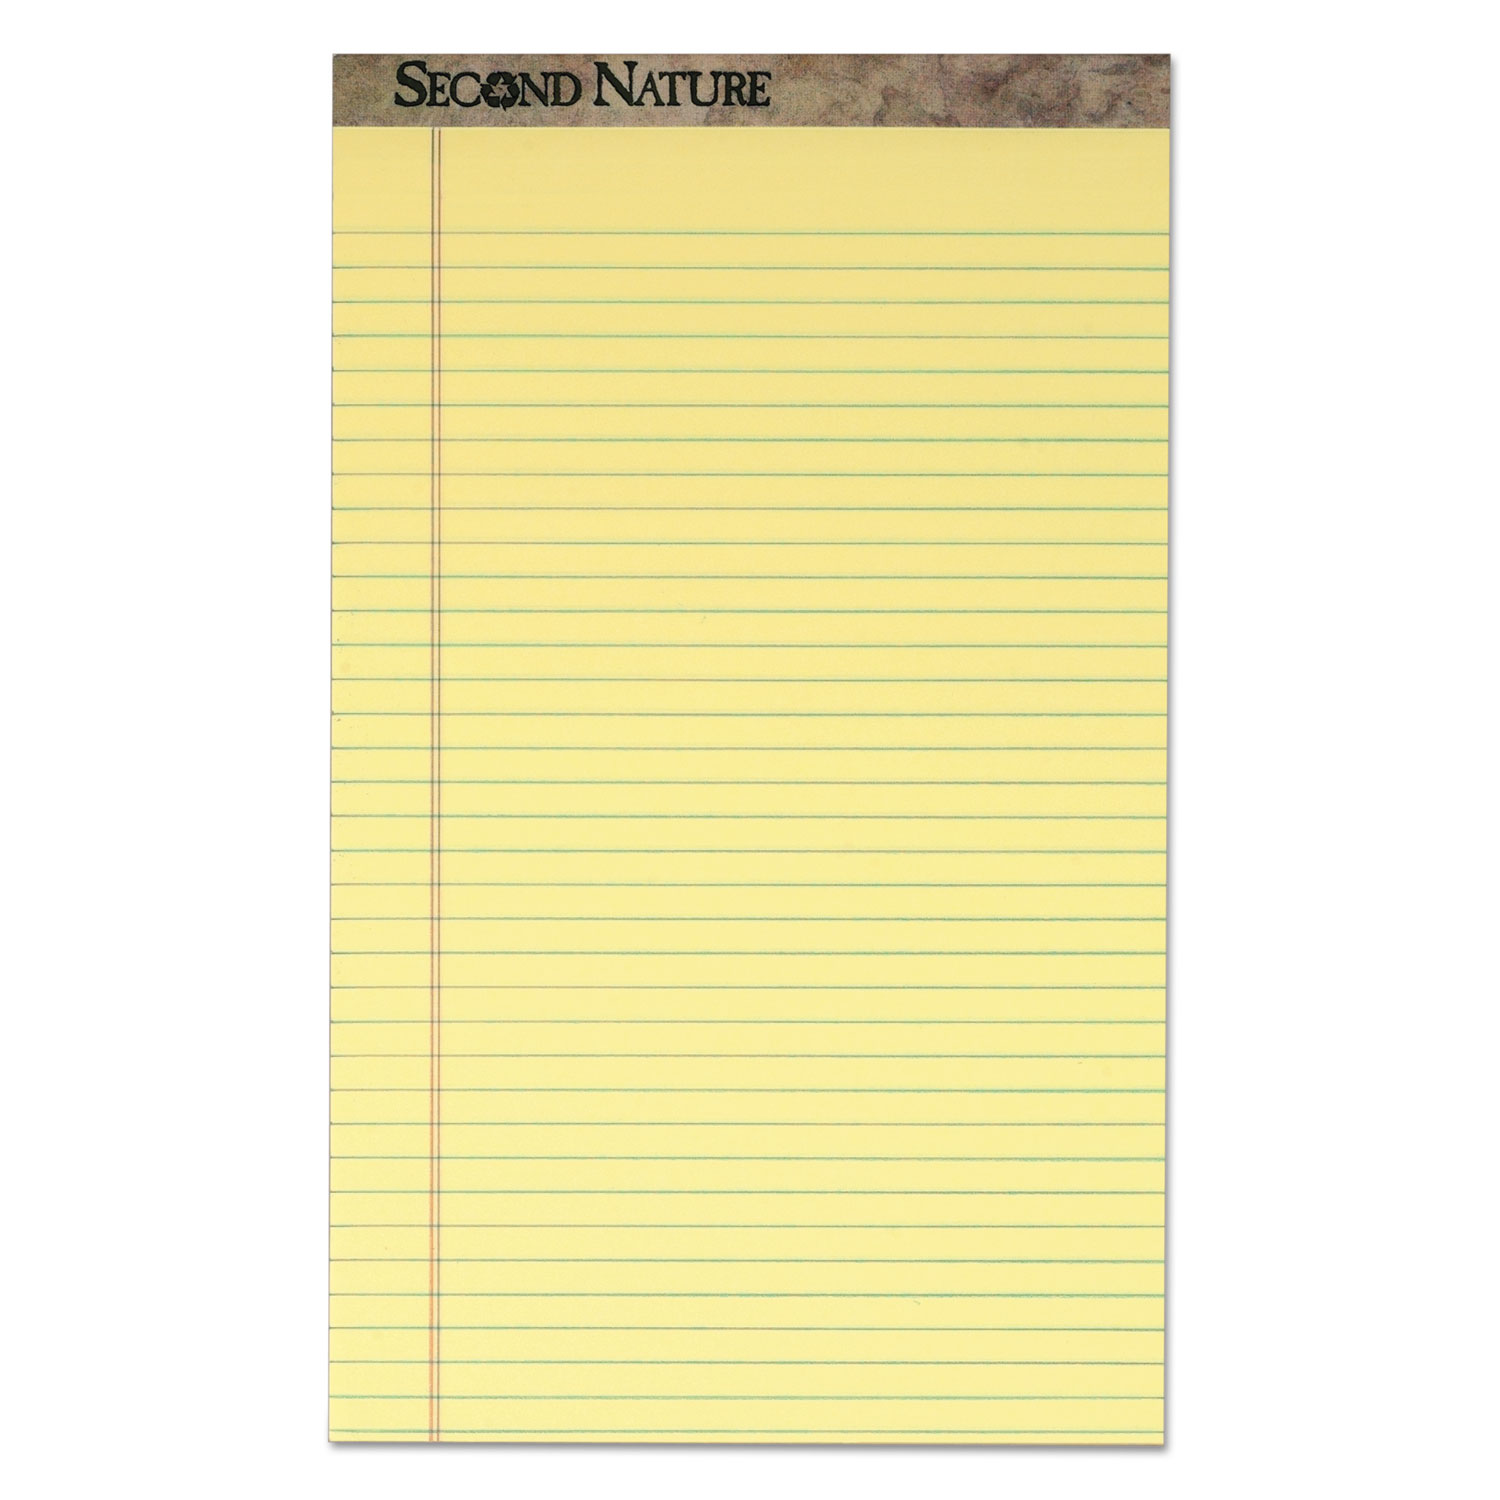  TOPS 74920 Second Nature Recycled Pads, Wide/Legal Rule, 8.5 x 14, Canary, 50 Sheets, Dozen (TOP74920) 